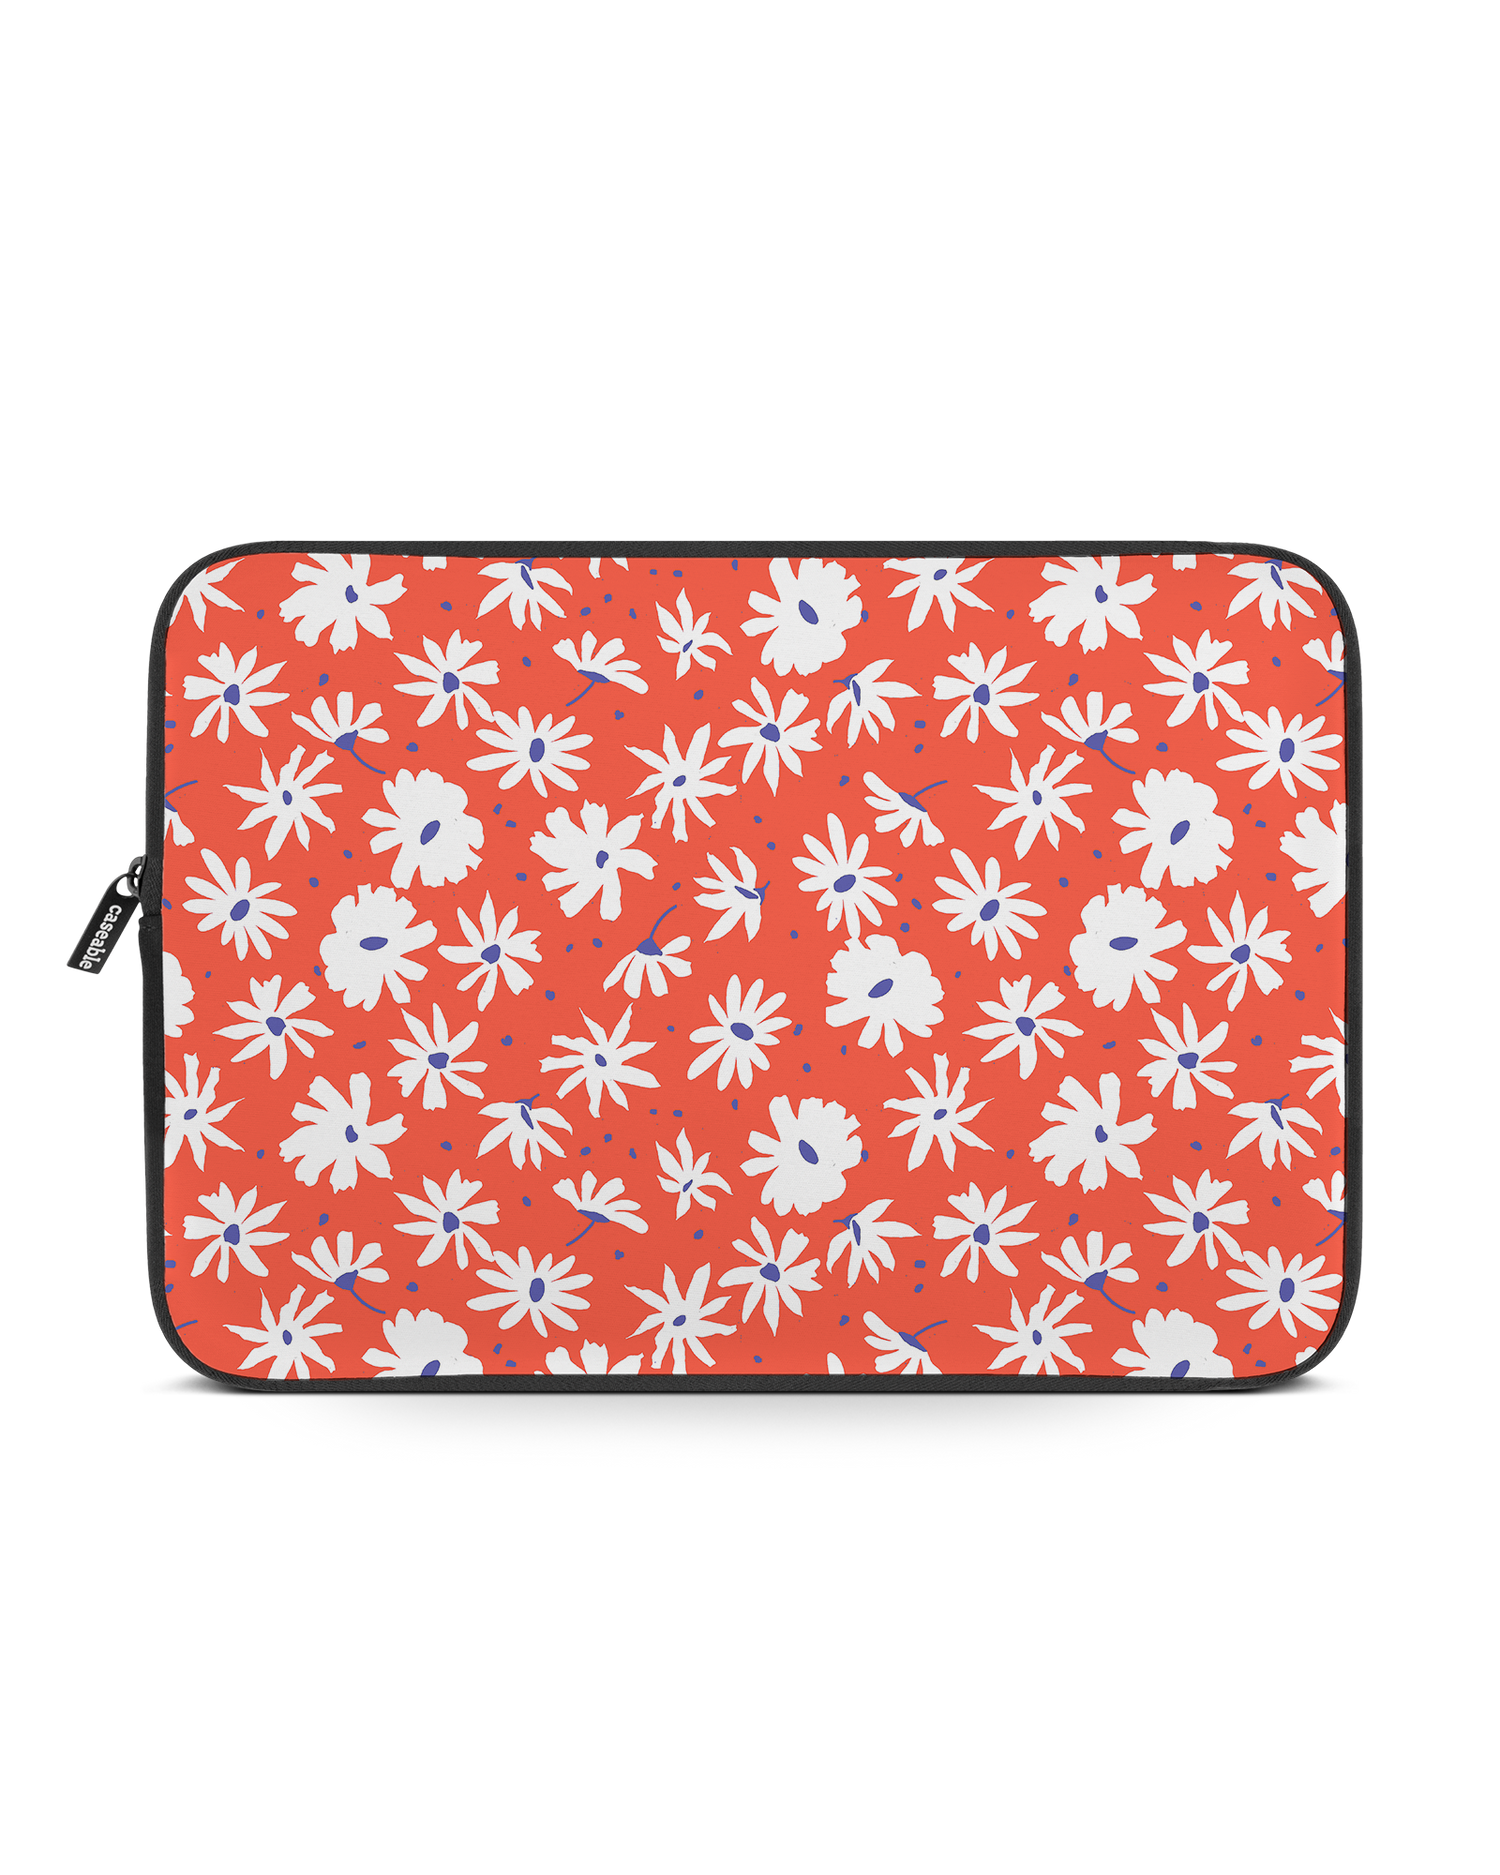 Retro Daisy Laptop Case 15-16 inch: Front View